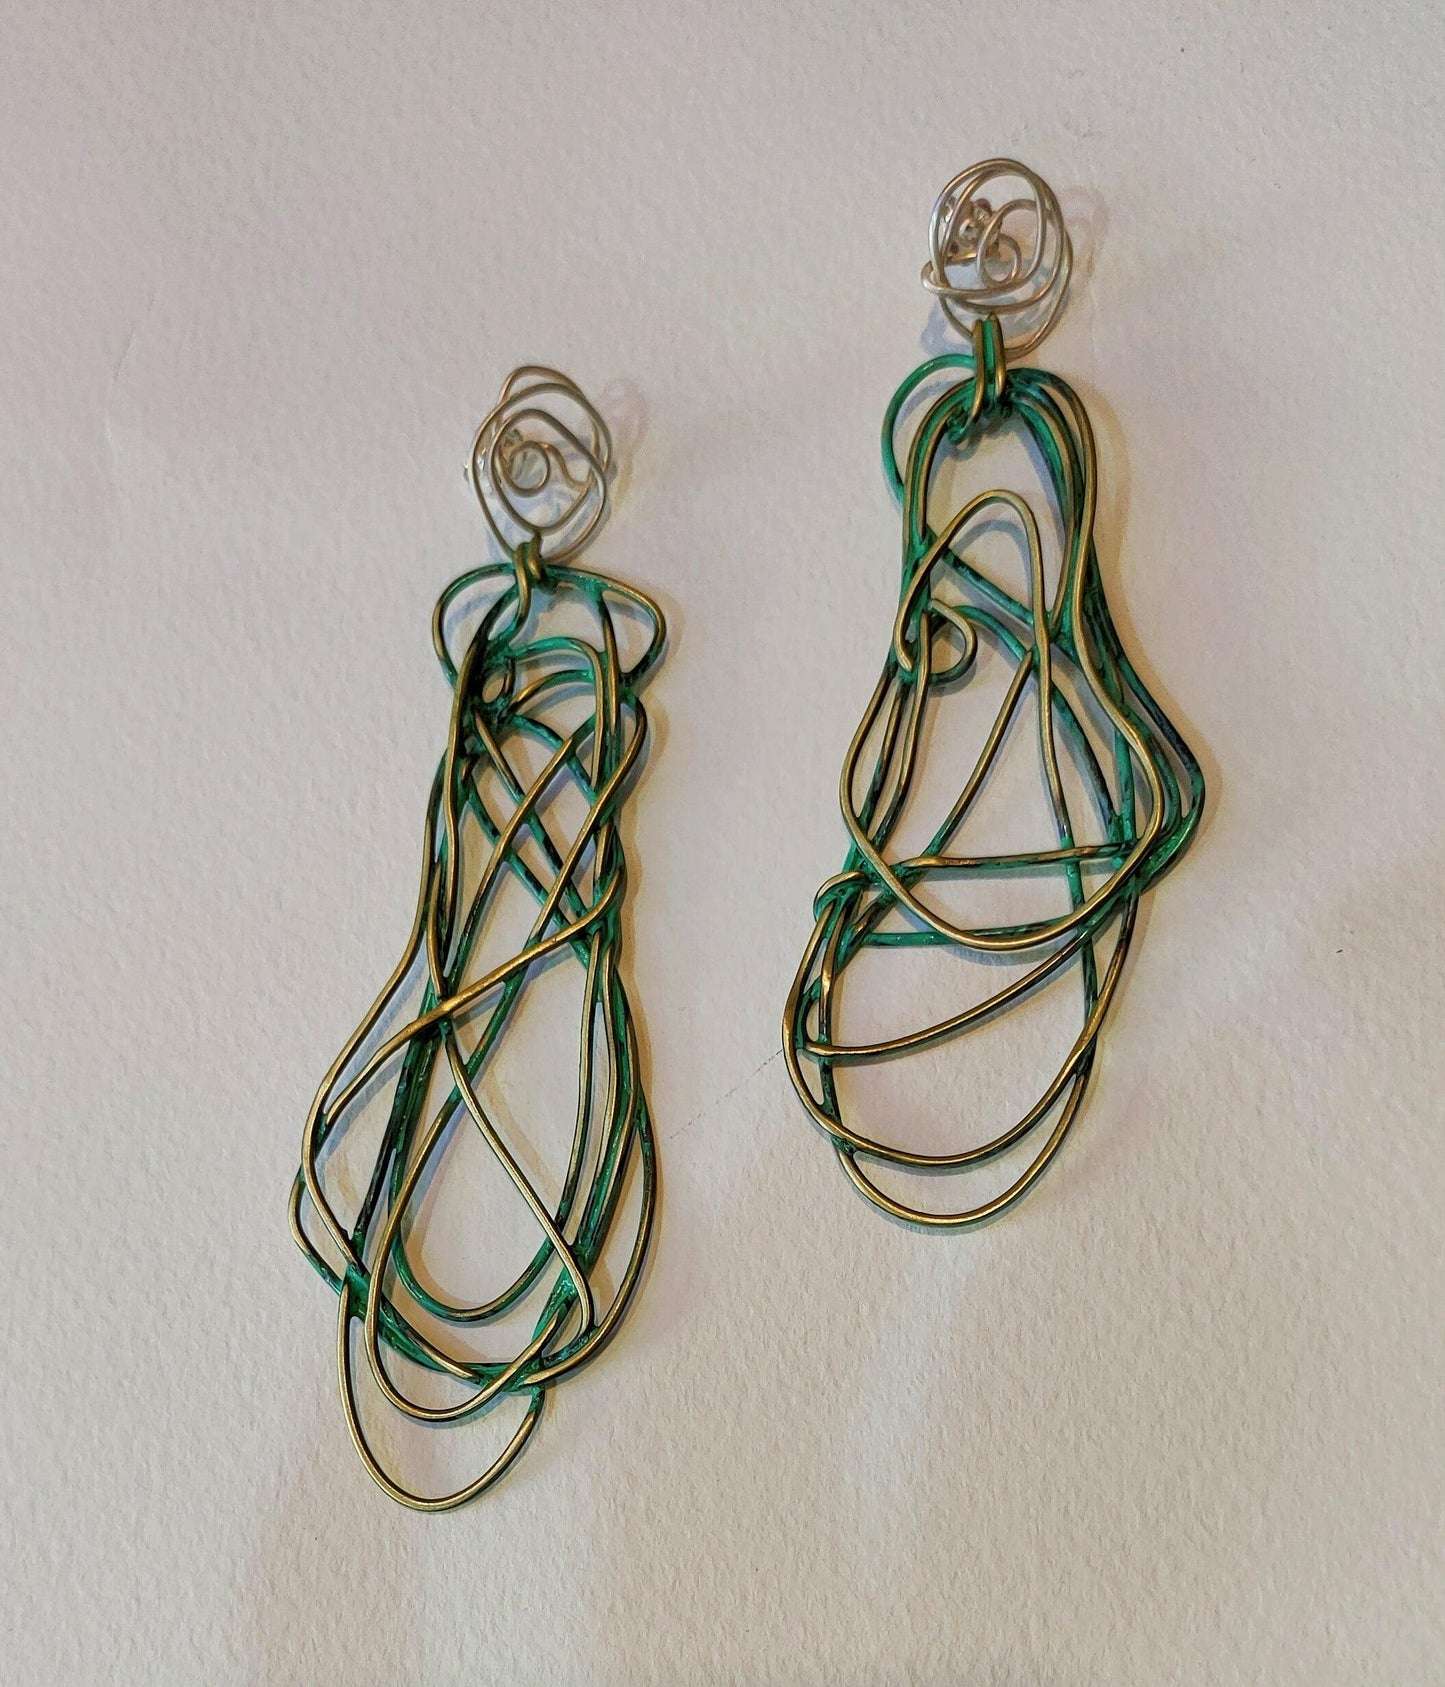 Bronze earrings with green and silver patina